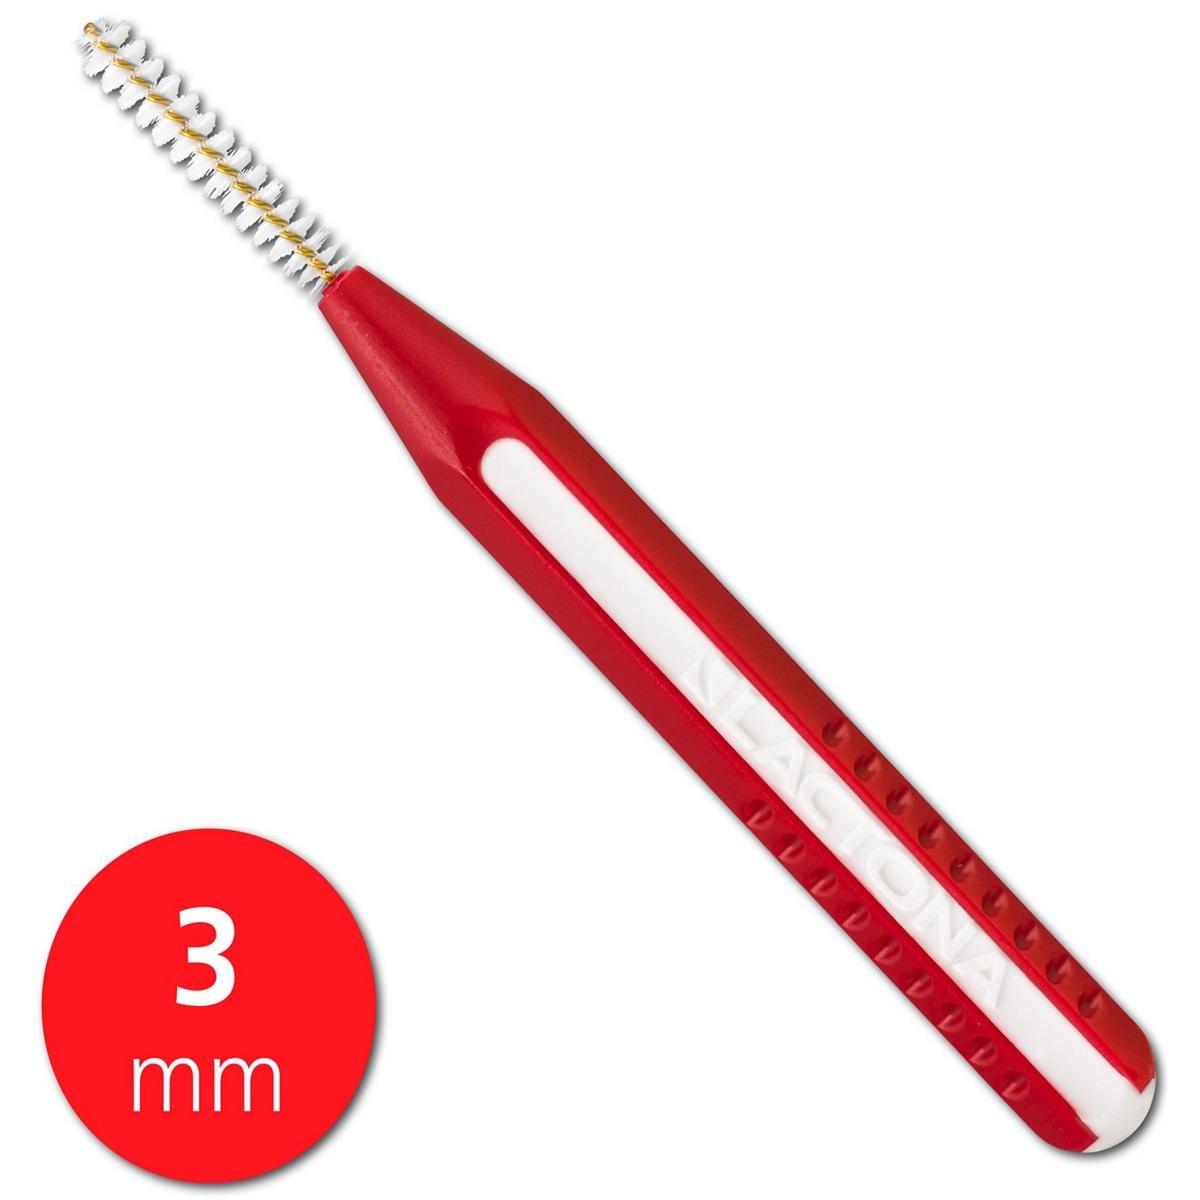 EasyGrip - Recharge - 3 mm rouge 200 pcs